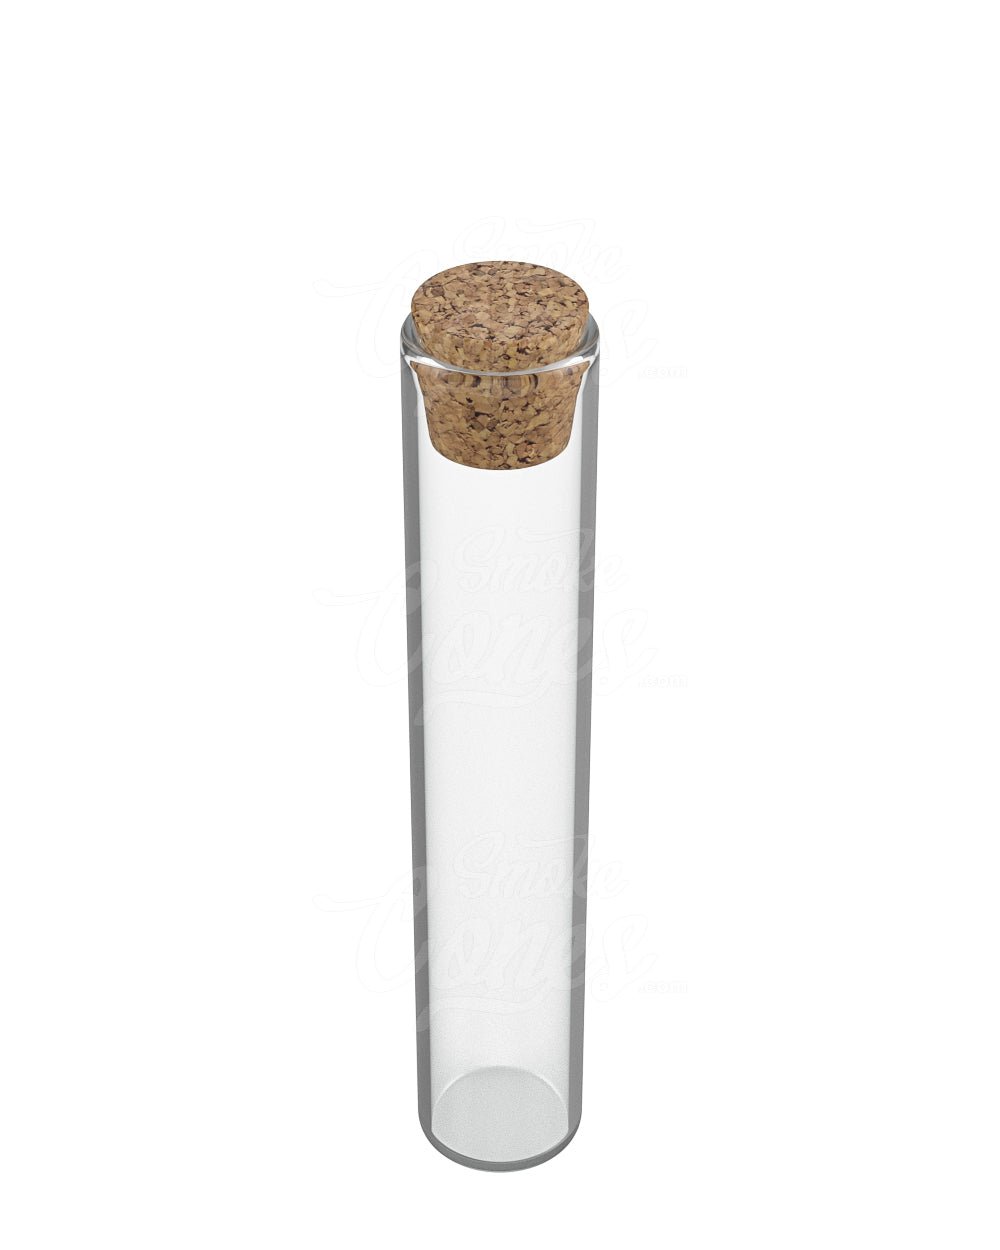 120mm King Size Clear Glass Pre-Roll Tubes with Cork Top 640/Box - 5